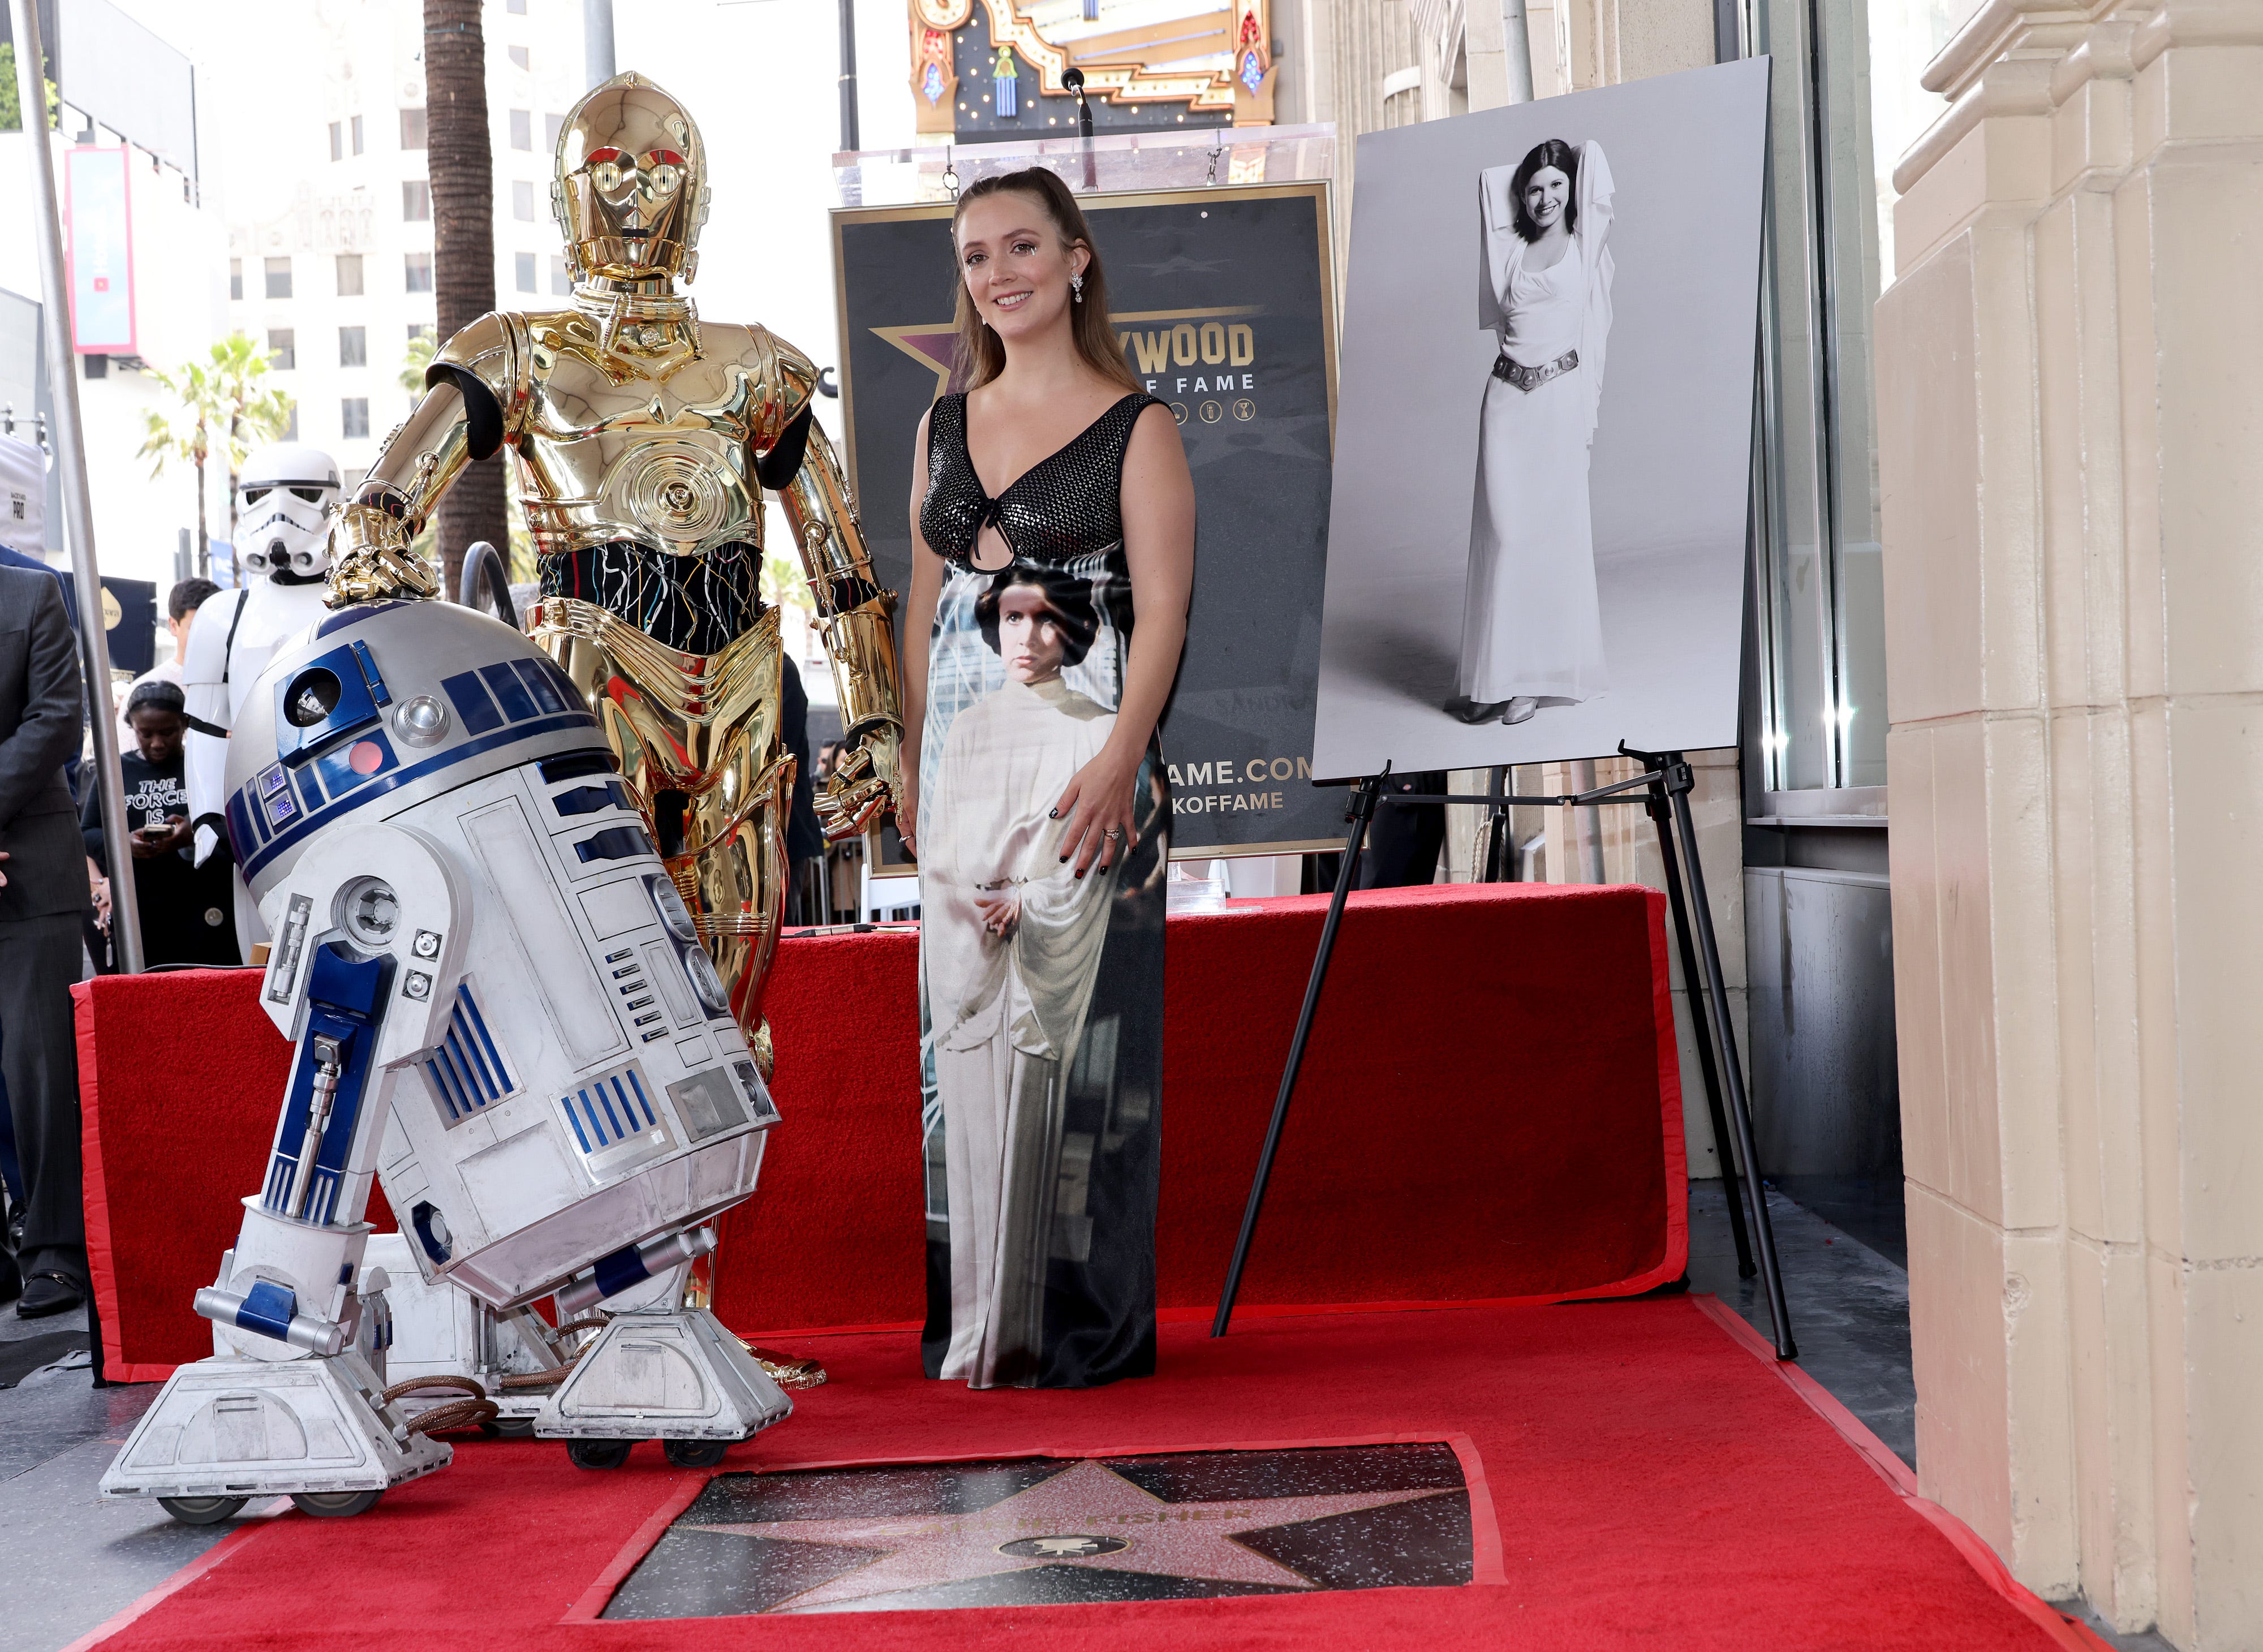 "Star Wars" actress <a href="https://www.usatoday.com/story/entertainment/celebrities/2023/05/04/carrie-fisher-hollywood-walk-of-fame-billie-lourd-mark-hamill/70185501007/">Carrie Fisher</a> received a posthumous star on May 4, 2023, also known as May the Fourth (a "Star Wars" holiday). Fisher was honored by daughter Billie Lourd, right, and co-star Mark Hamill during the ceremony.